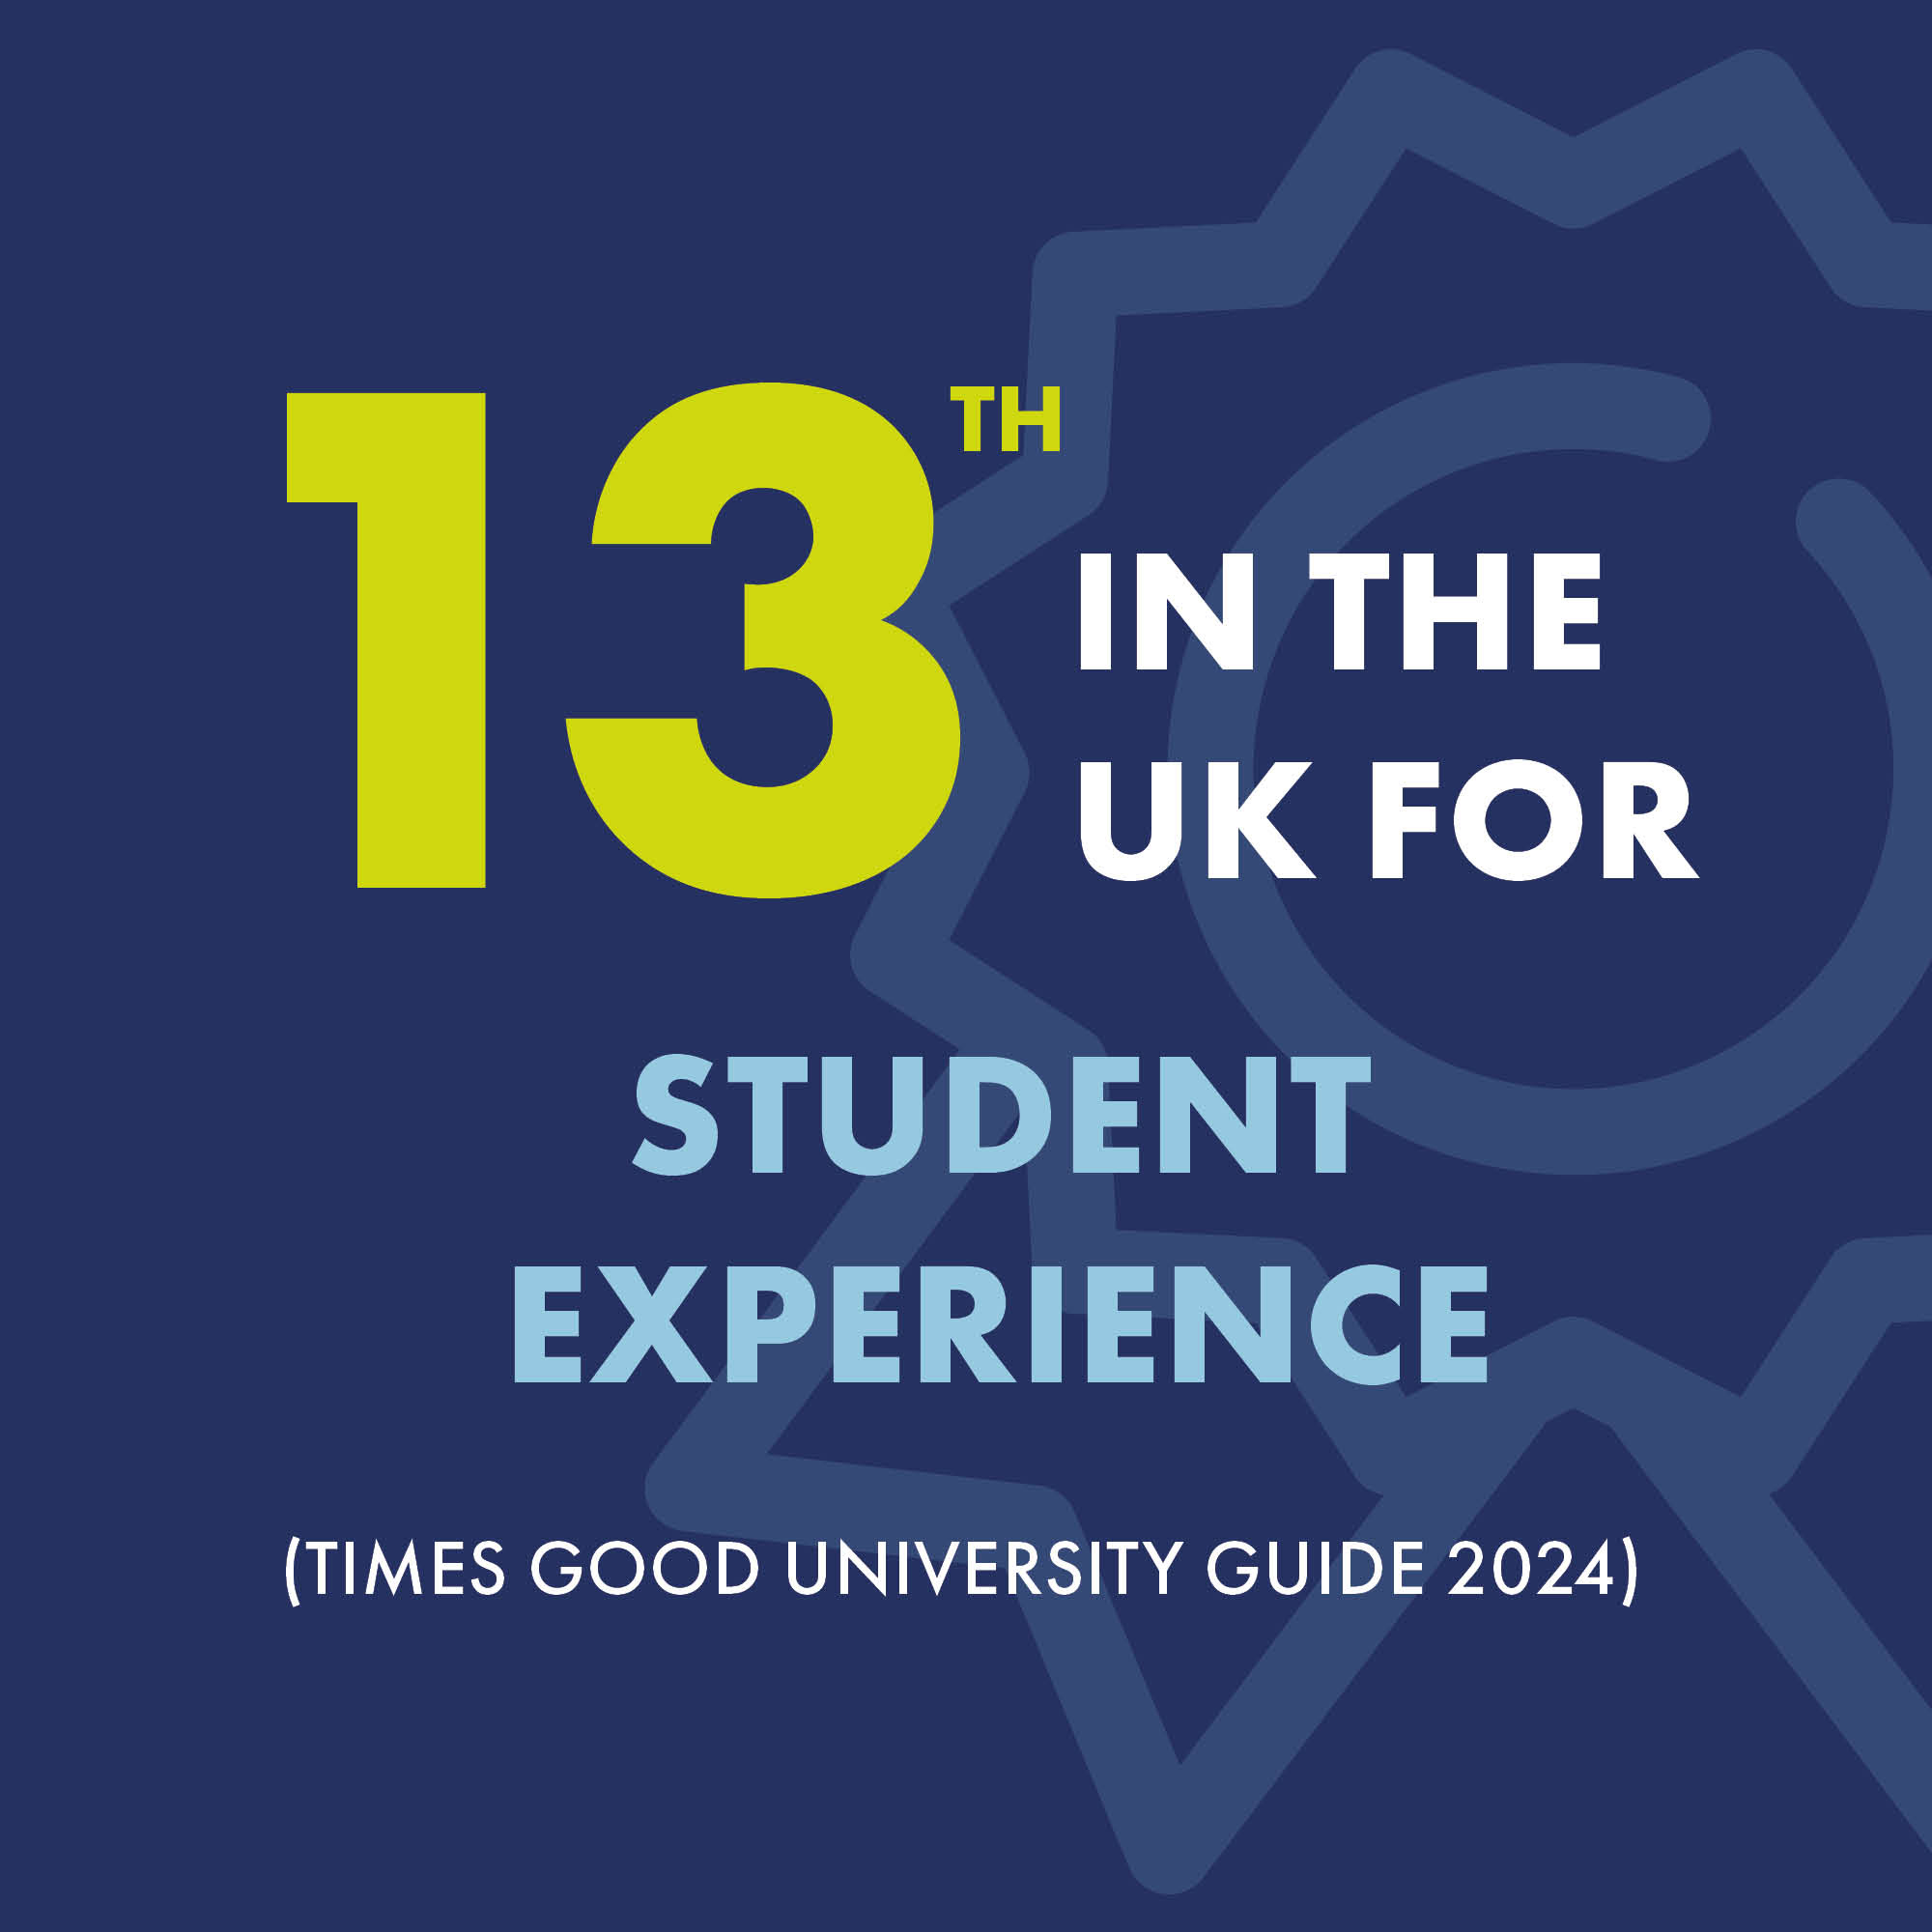 Law is ranked 13th in the UK for student experience